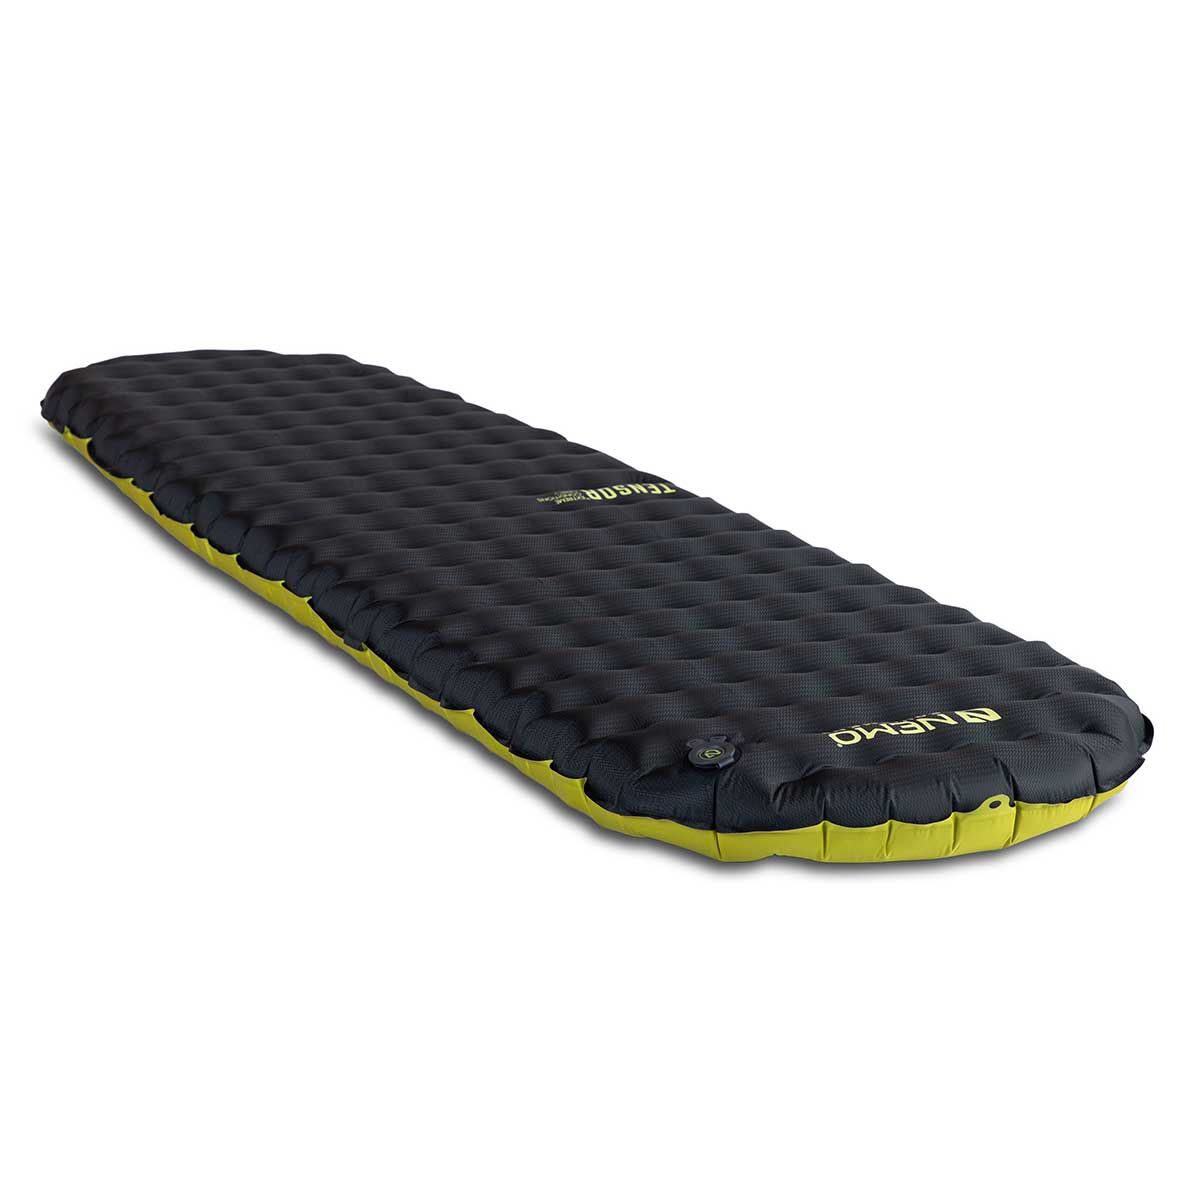 Matelas gonflable Nemo Tensor Extreme Conditions